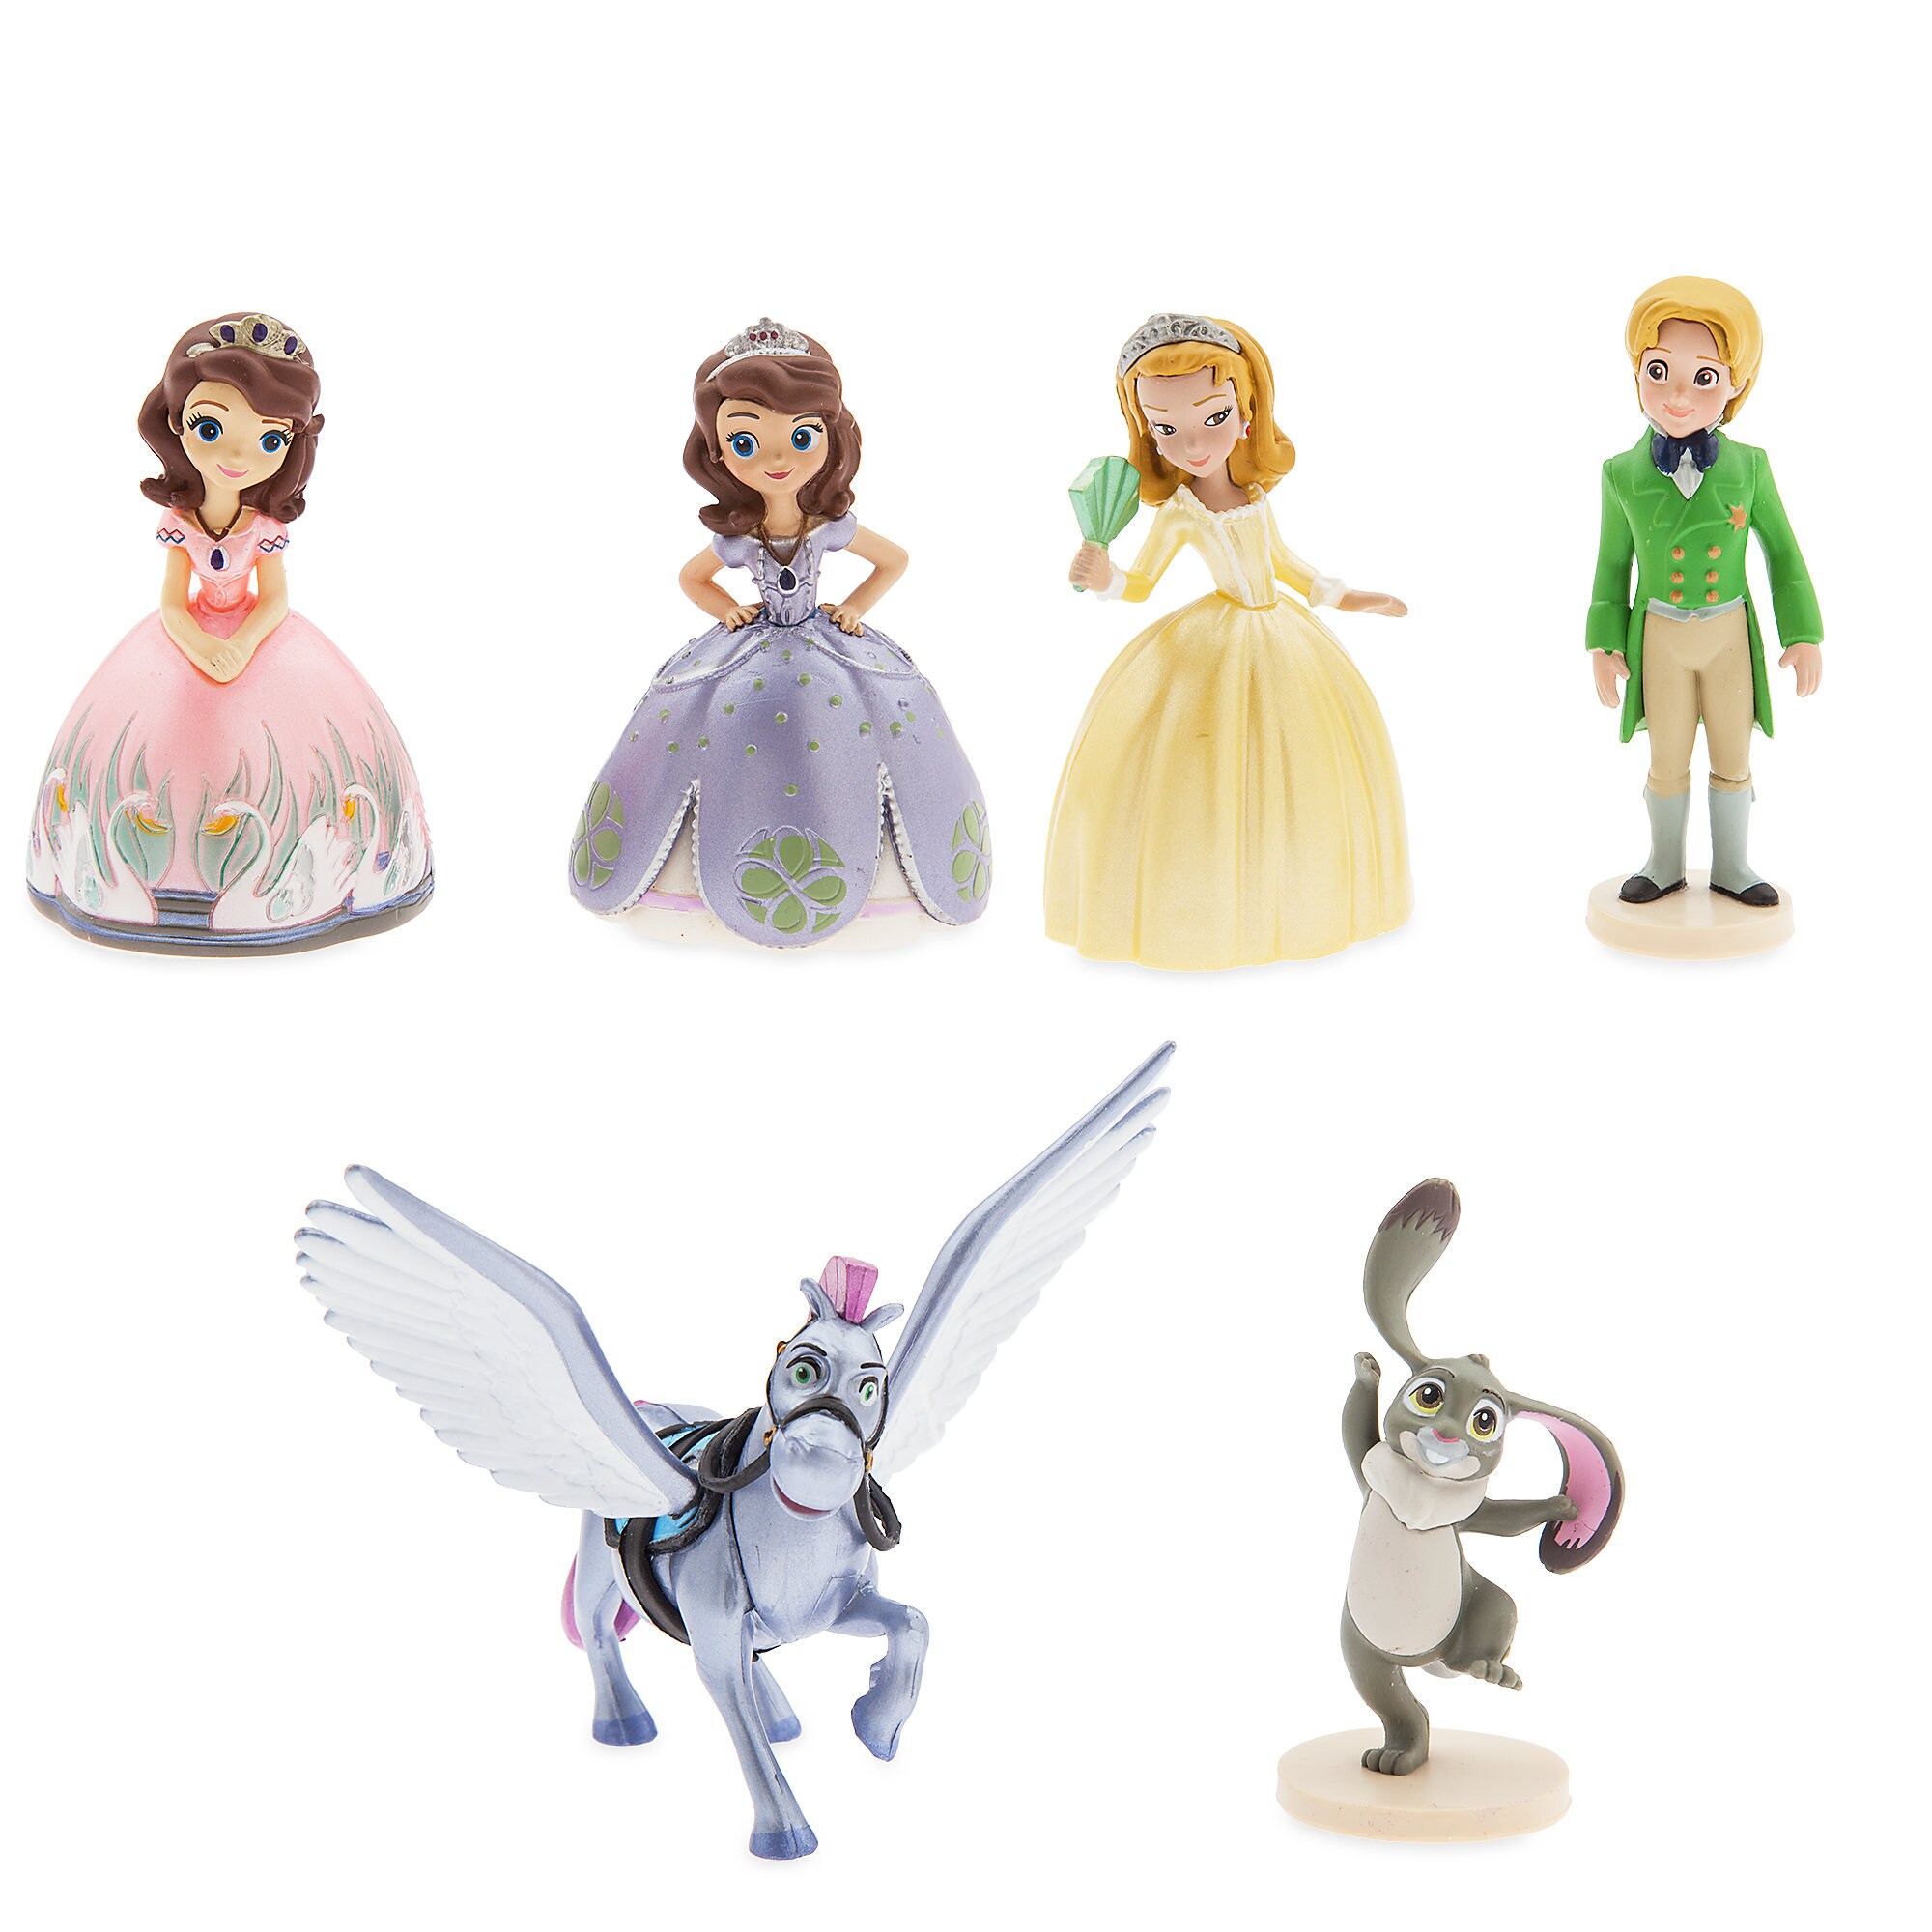 sofia the first figures